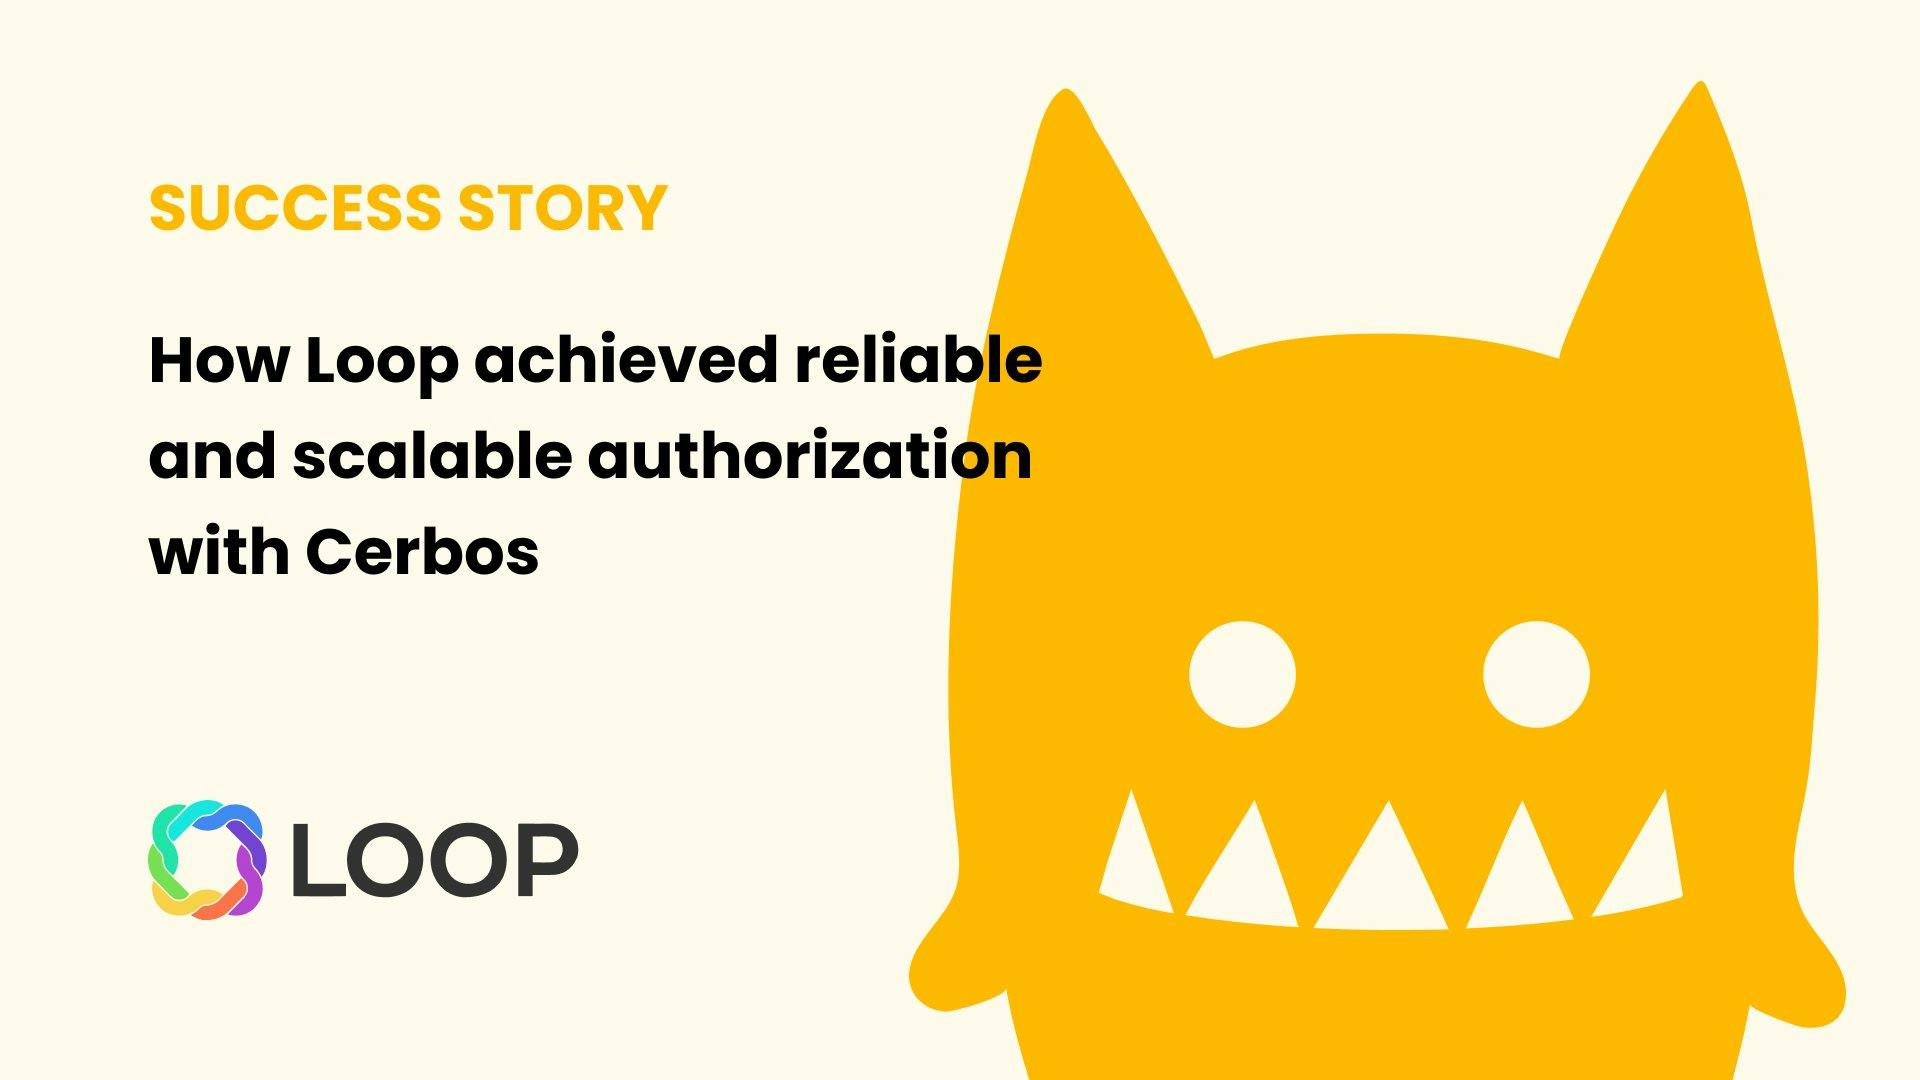 How Loop achieved reliable and scalable authorization with Cerbos